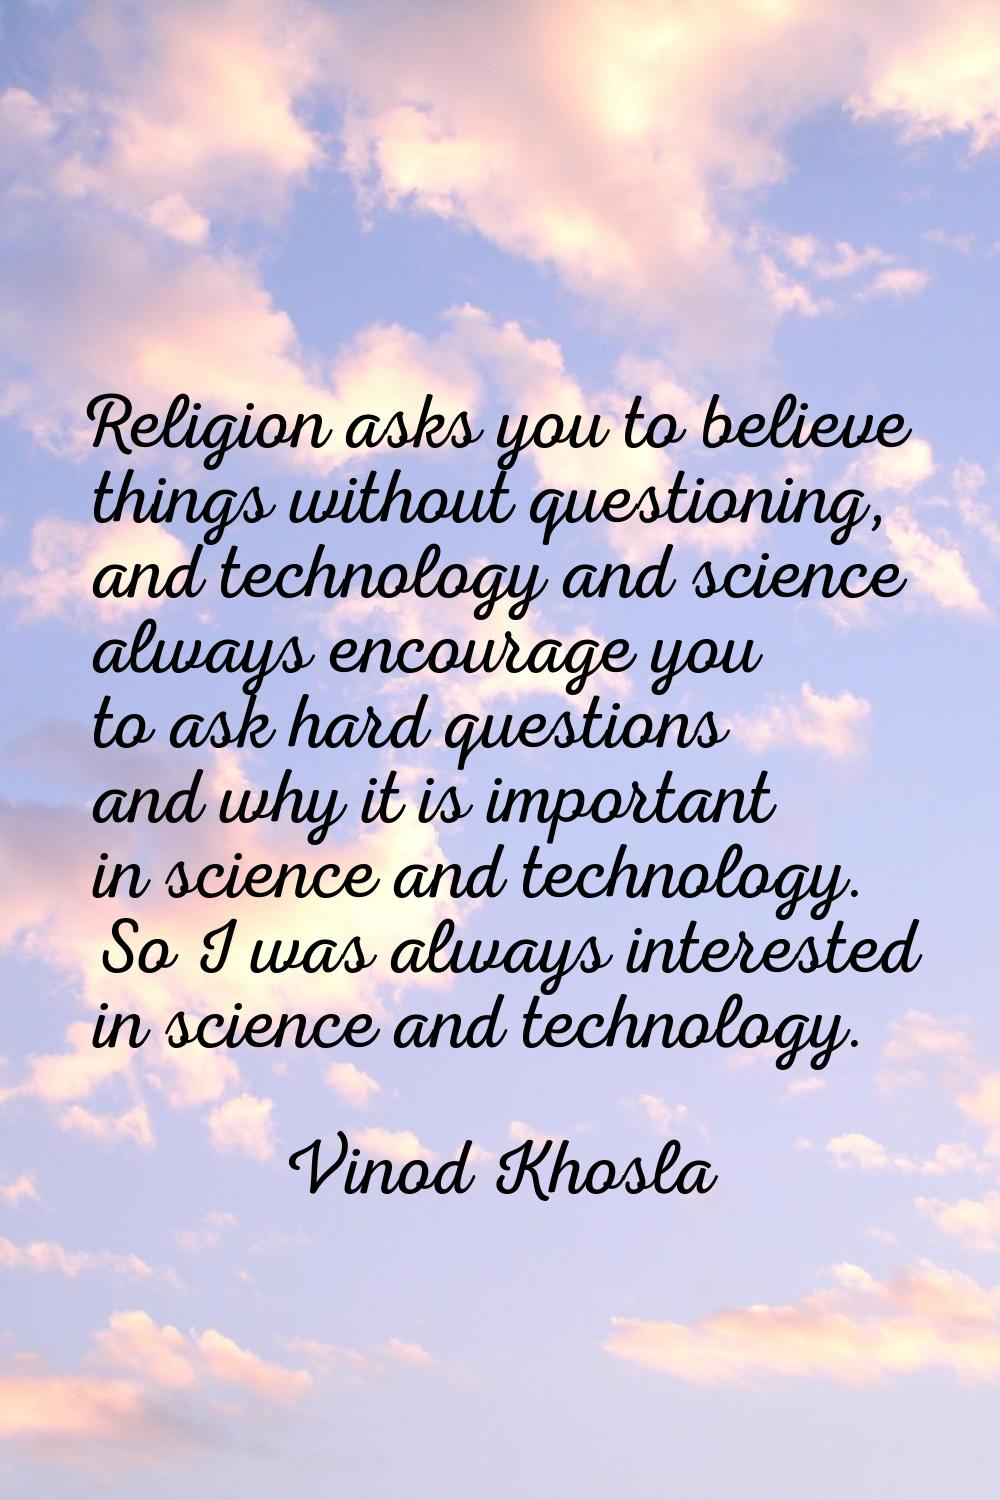 Religion asks you to believe things without questioning, and technology and science always encourag